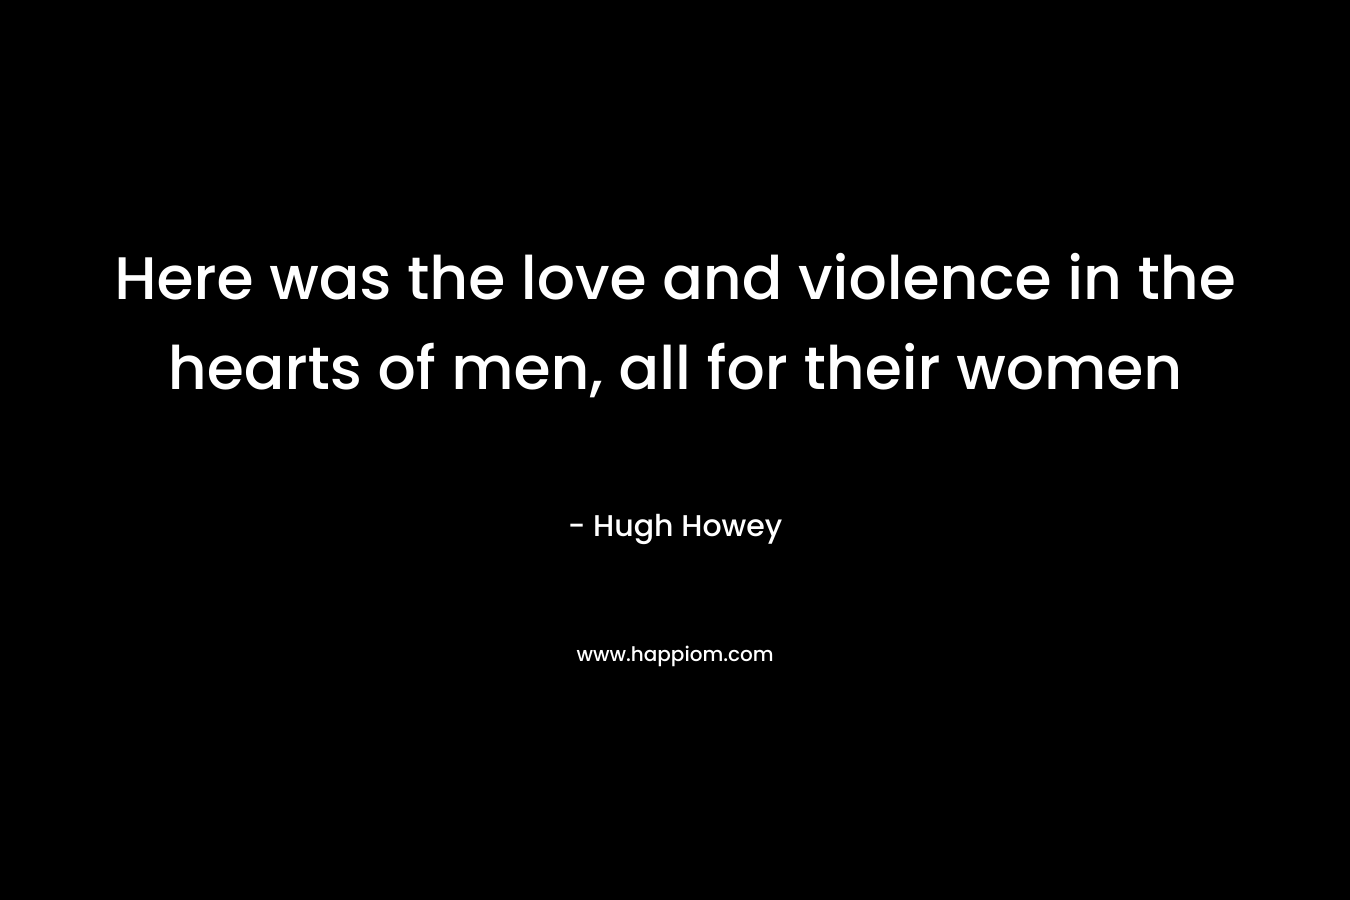 Here was the love and violence in the hearts of men, all for their women